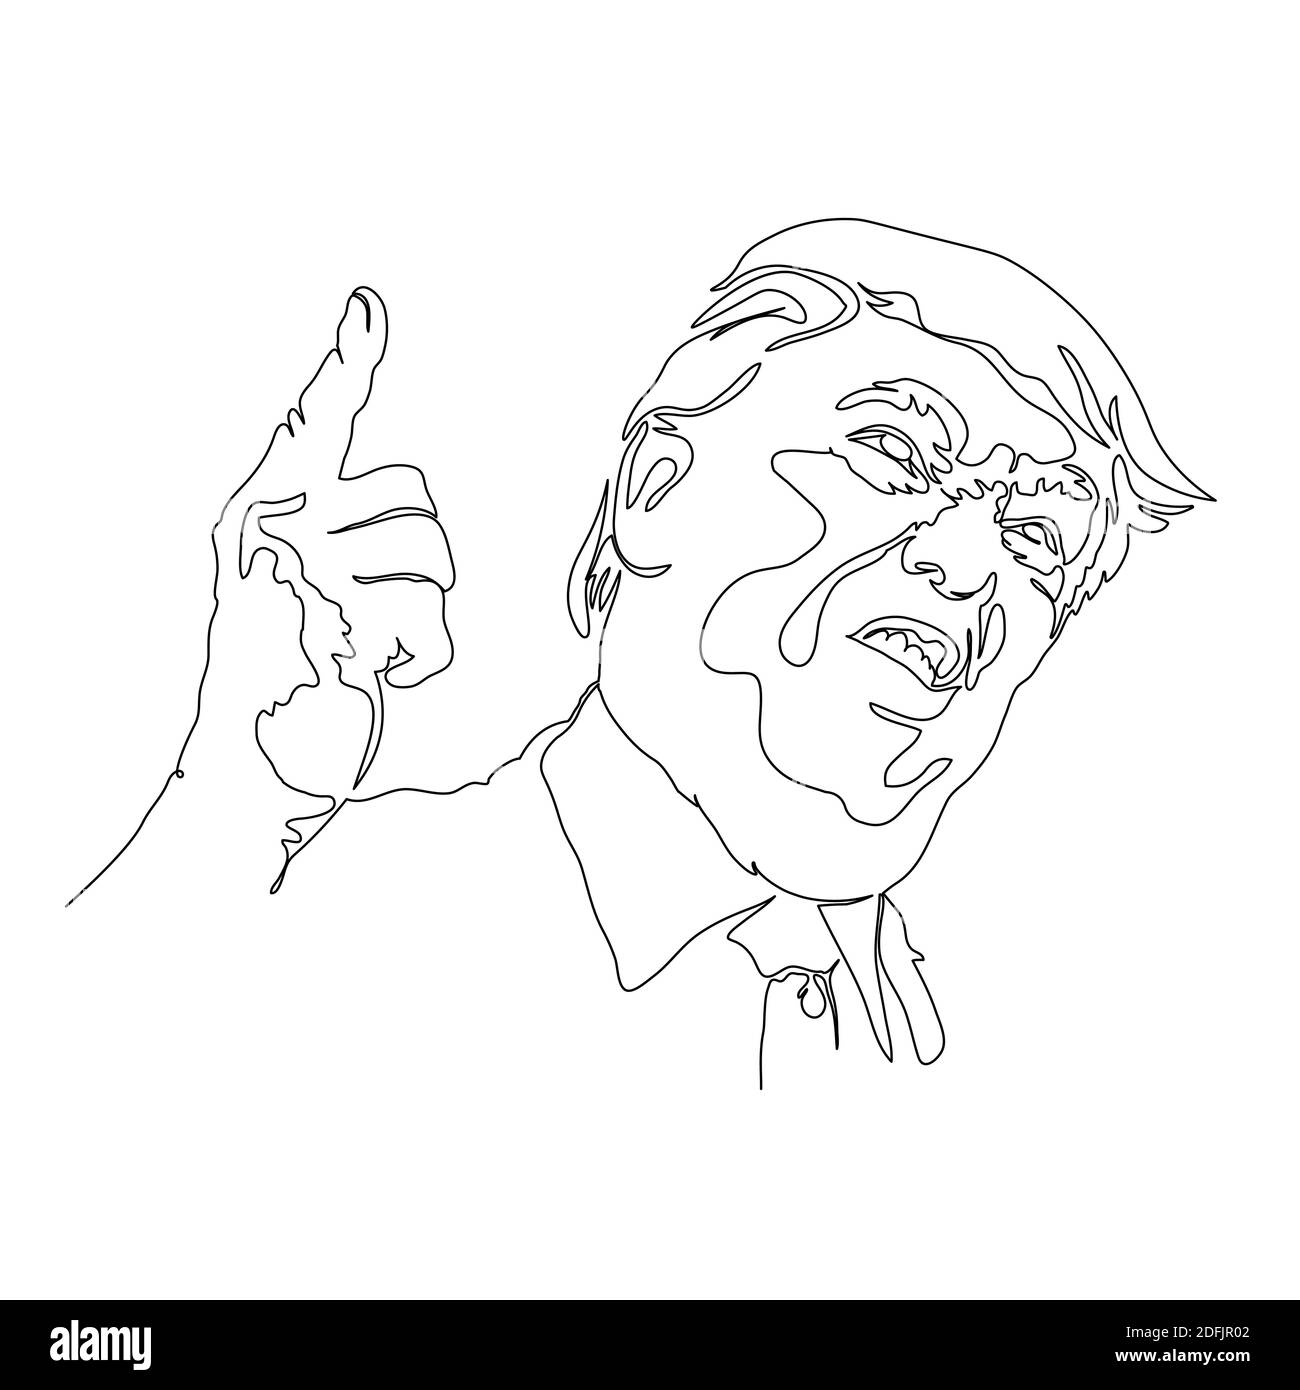 Drawing caricature of Donald Trump, serious face, pointing  finger up, continuous line minimalist drawing. vector illustration. Stock Vector